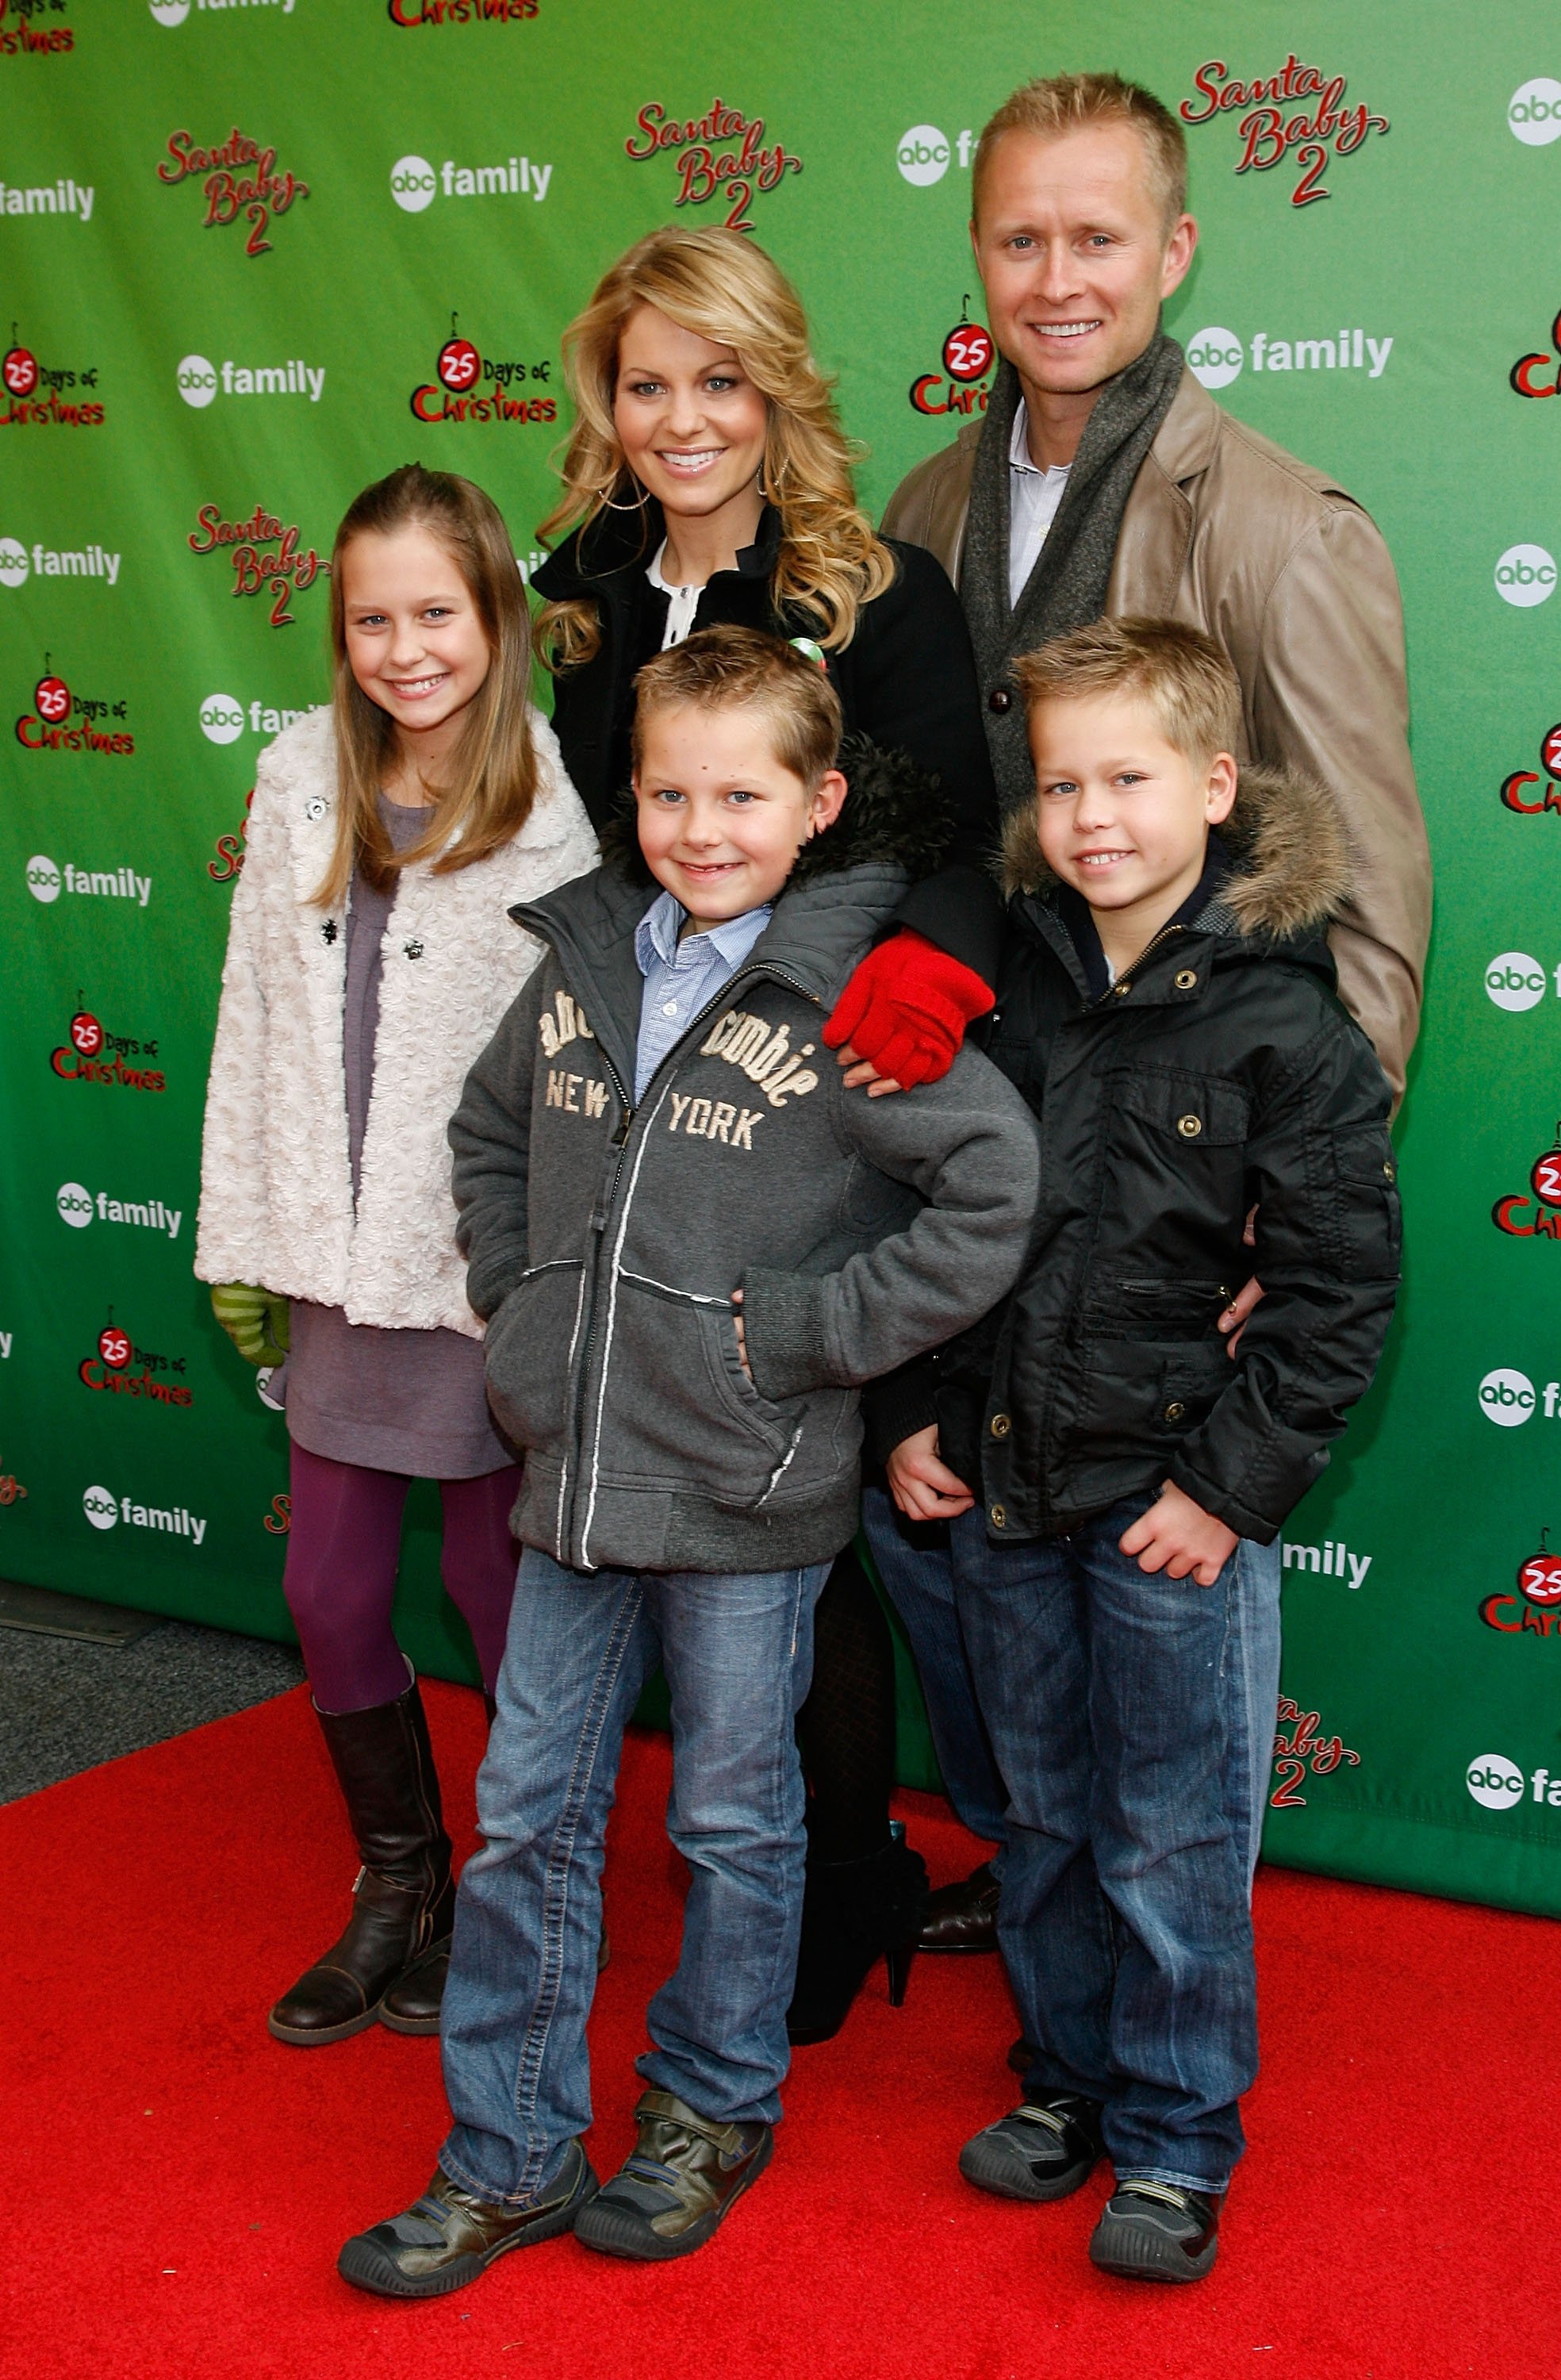 Actress Candace Cameron Bure and her husband Valeri Bure and children Natasha, Lev and Maksim attend the ABC Family's World Record Elf Party at Bryant Park on December 7, 2009 in New York City. | Source: Getty Images